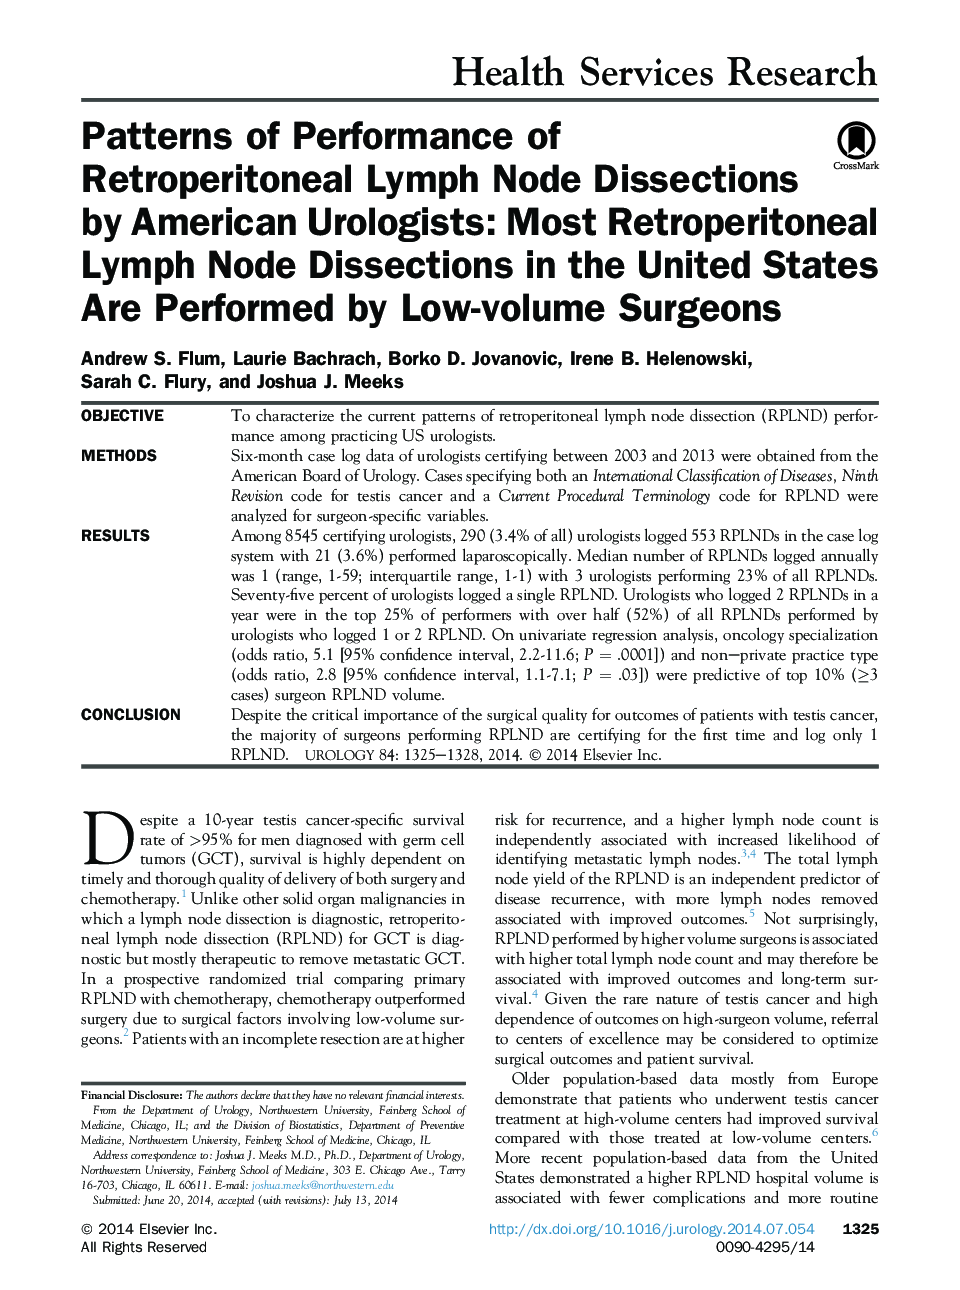 Patterns of Performance of Retroperitoneal Lymph Node Dissections by American Urologists: Most Retroperitoneal Lymph Node Dissections in the United States Are Performed by Low-volume Surgeons 